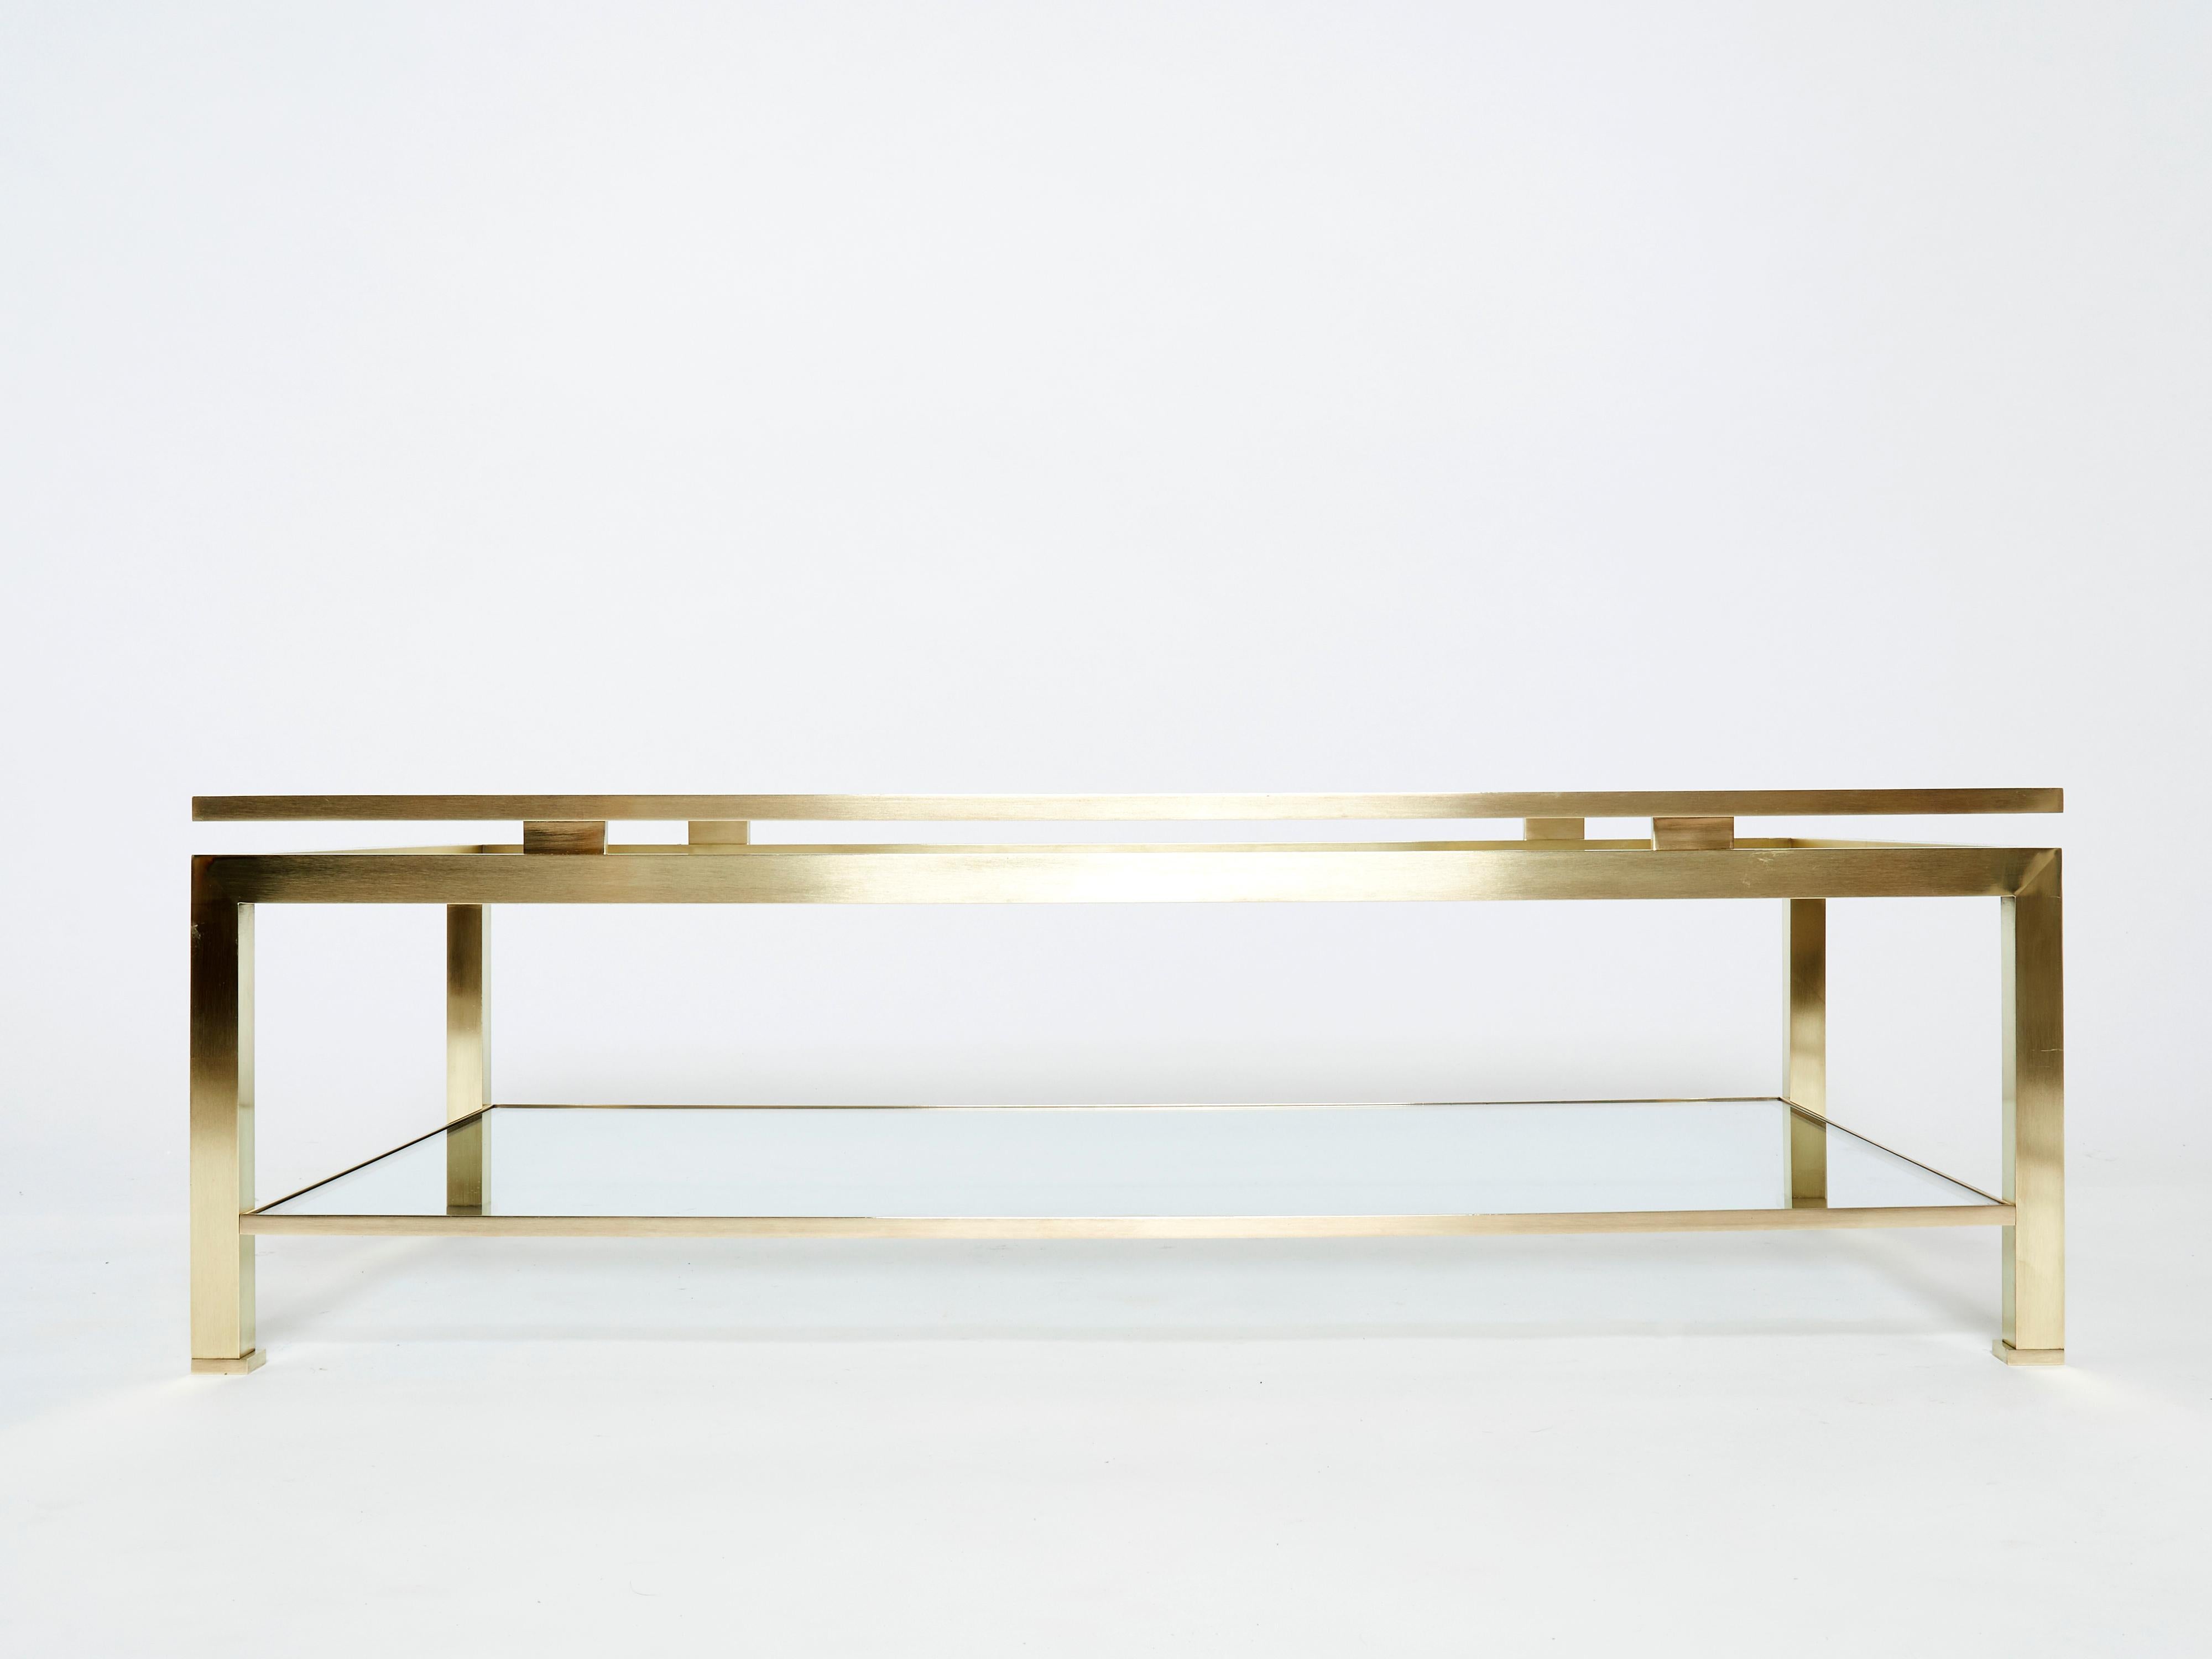 Late 20th Century French Brass Two-Tier Coffee Table Guy Lefevre for Maison Jansen 1970s